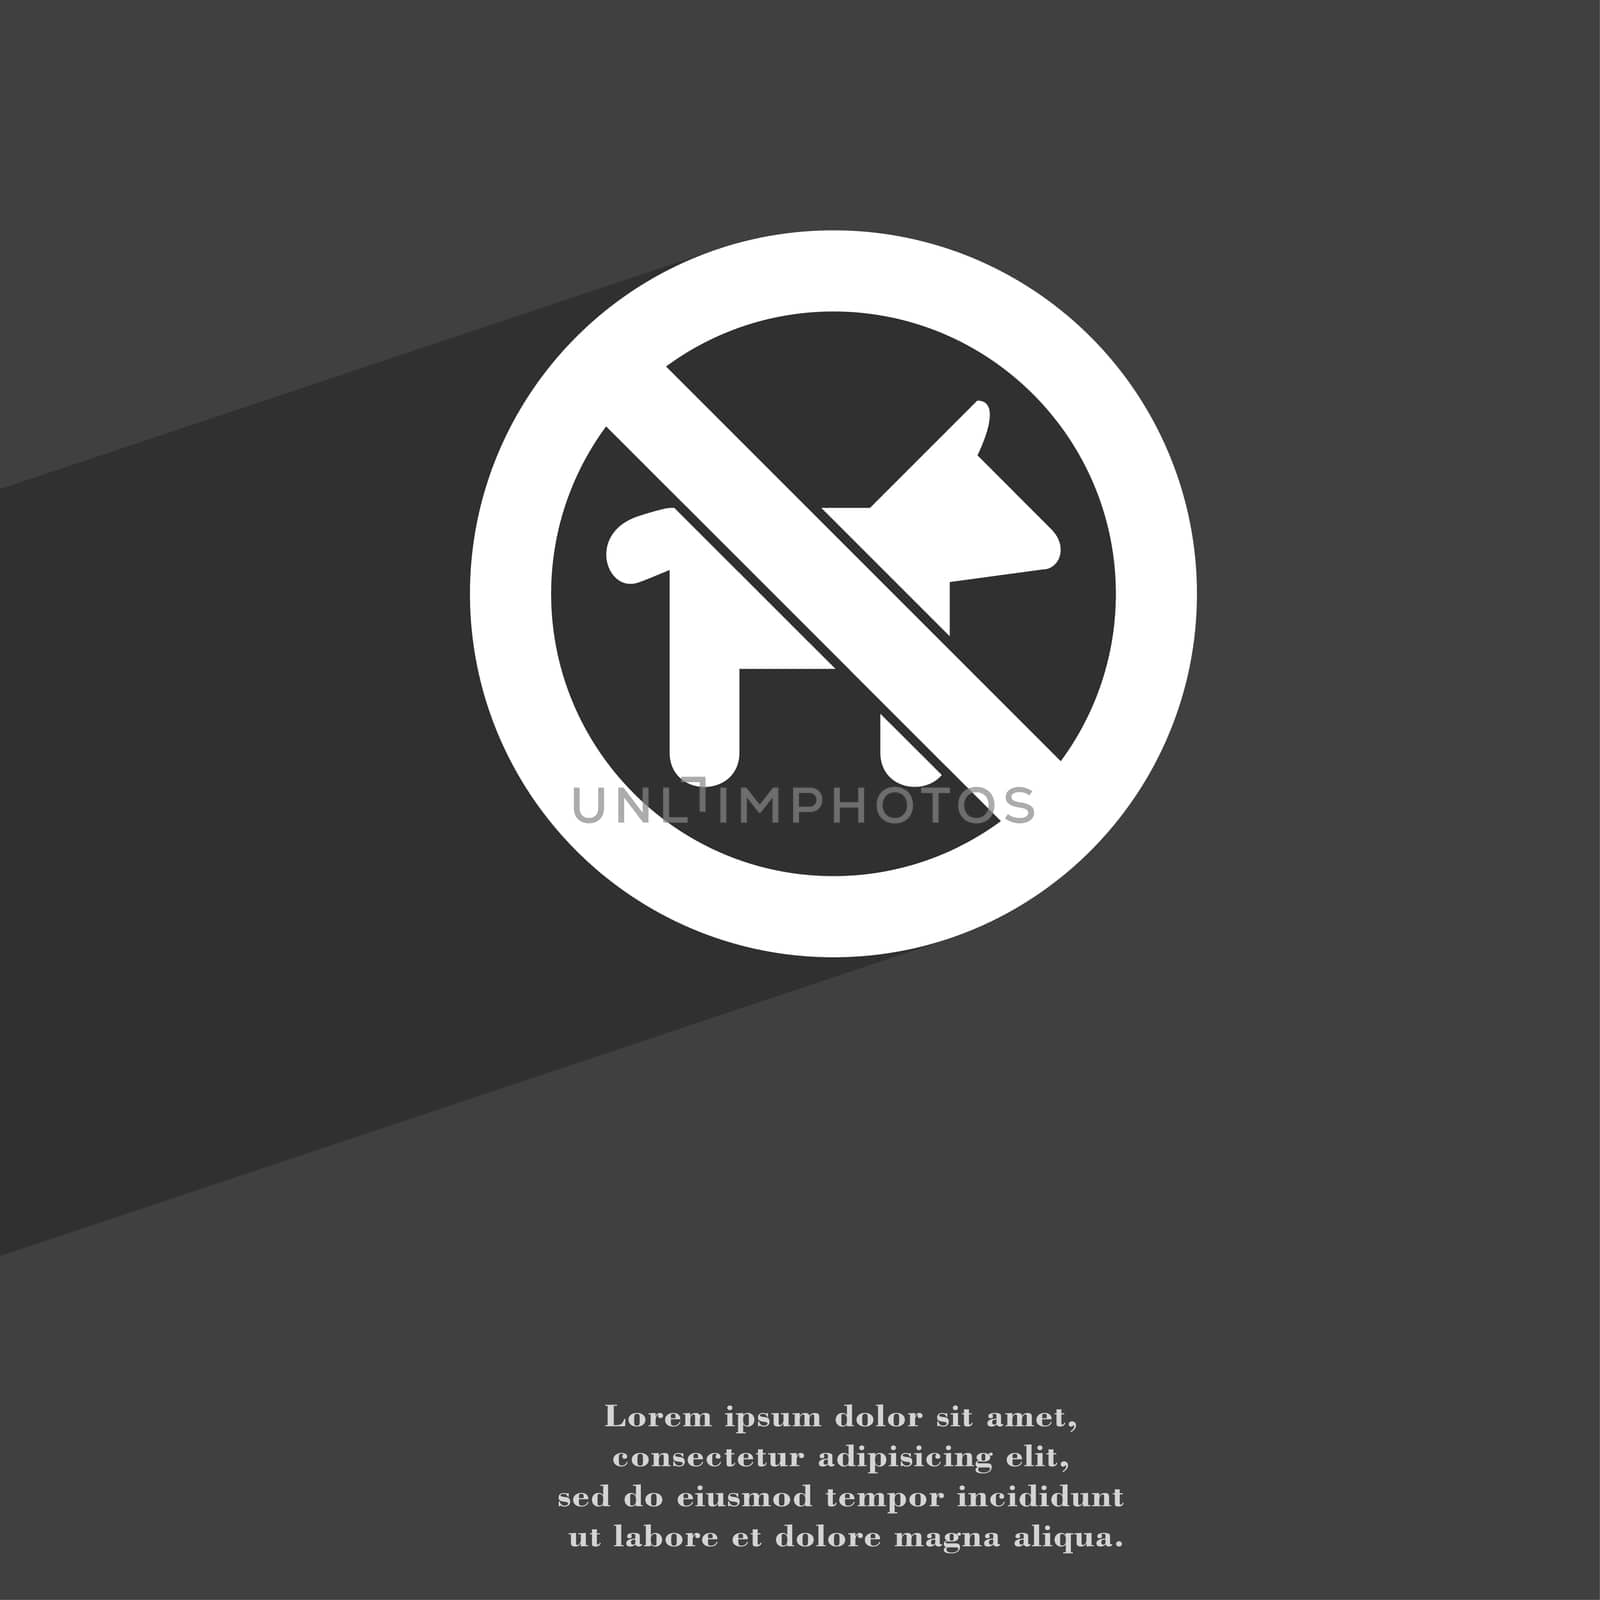 dog walking is prohibited icon symbol Flat modern web design with long shadow and space for your text.  by serhii_lohvyniuk